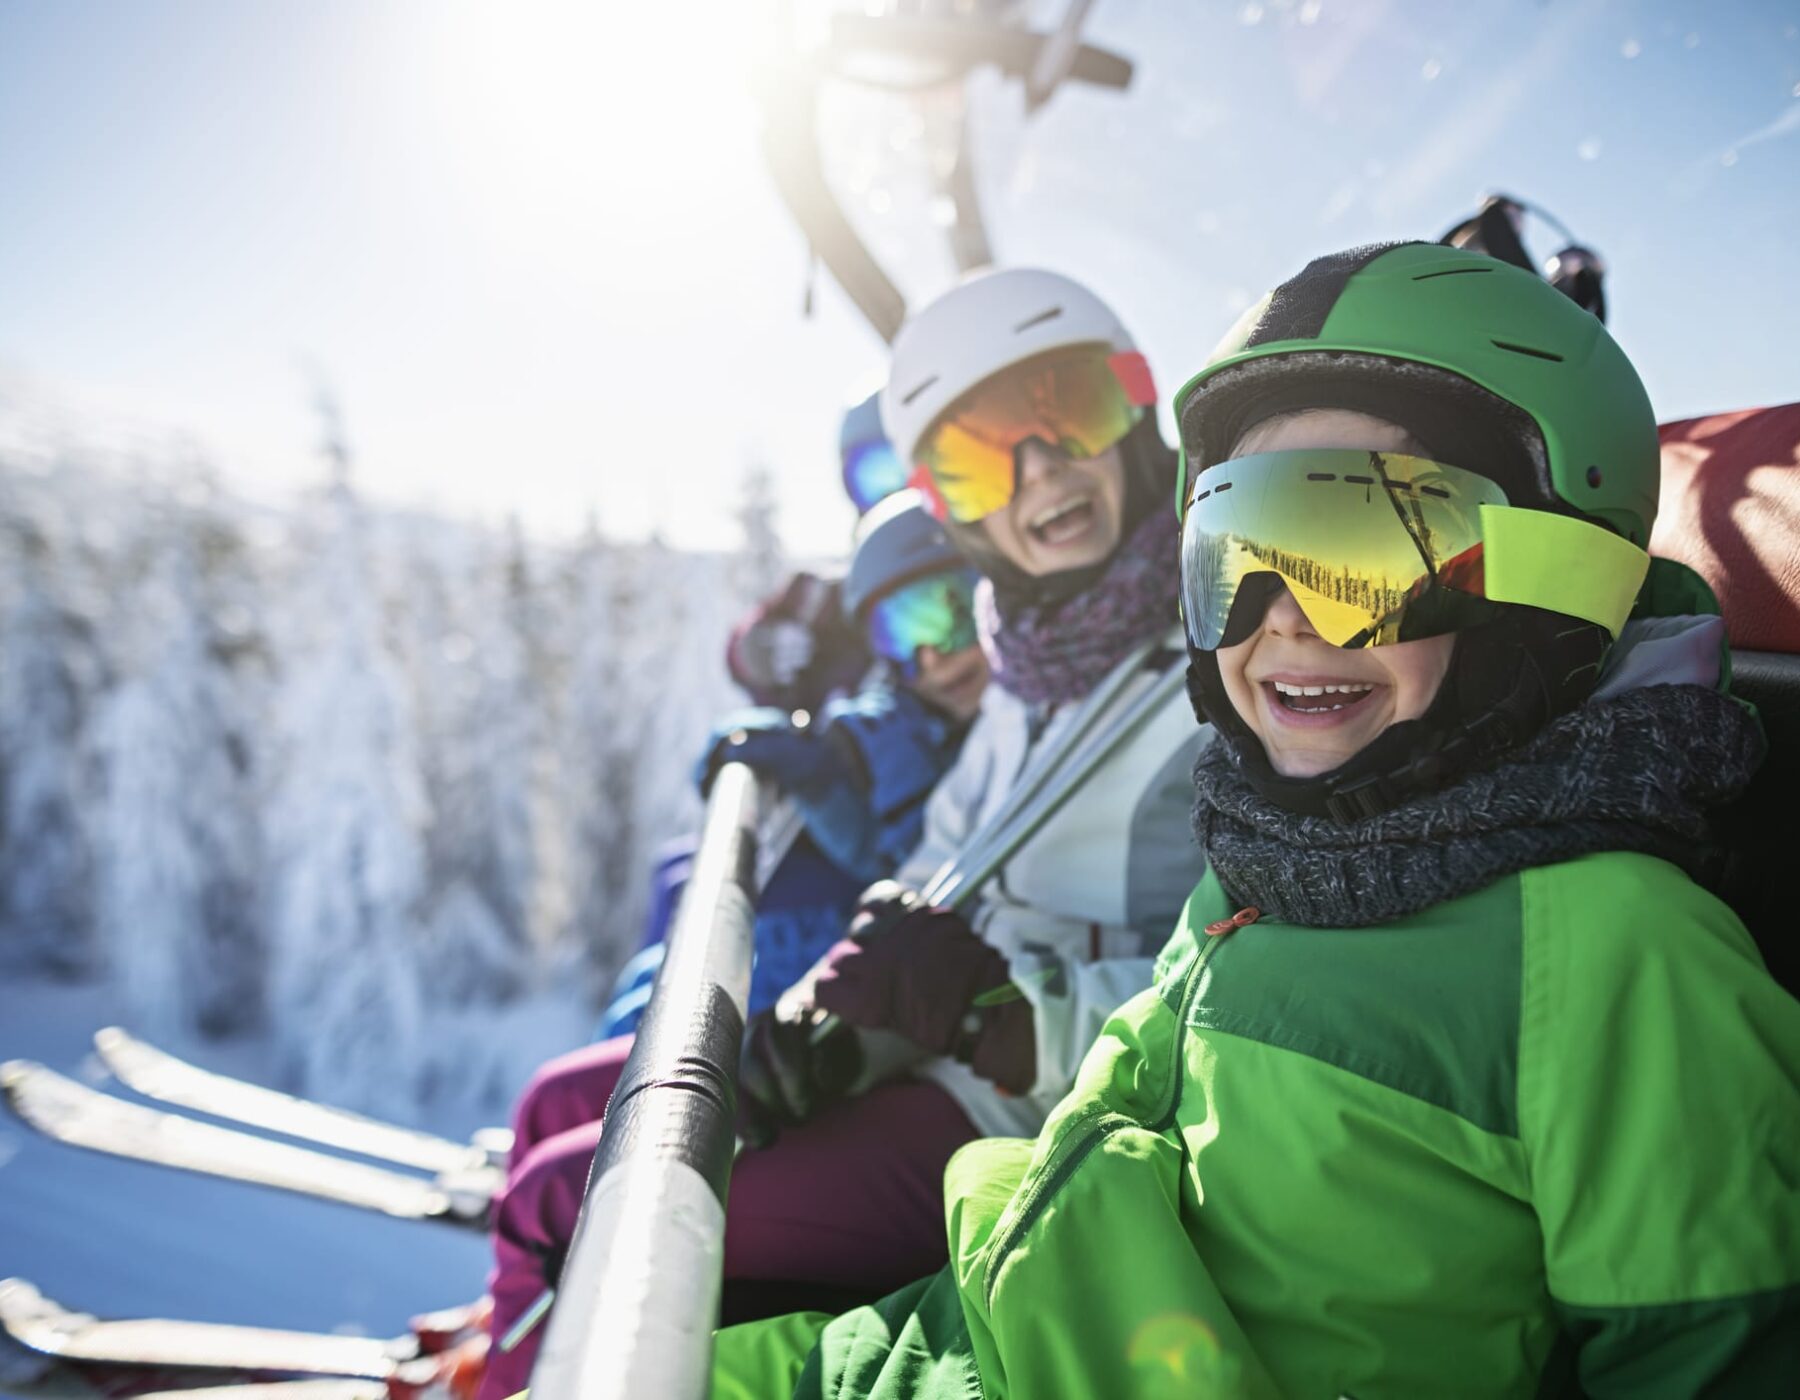 Mother skiing with kids on a sunny winter day. Family is sitting on chairlift cheering at the camera.
Nikon D850